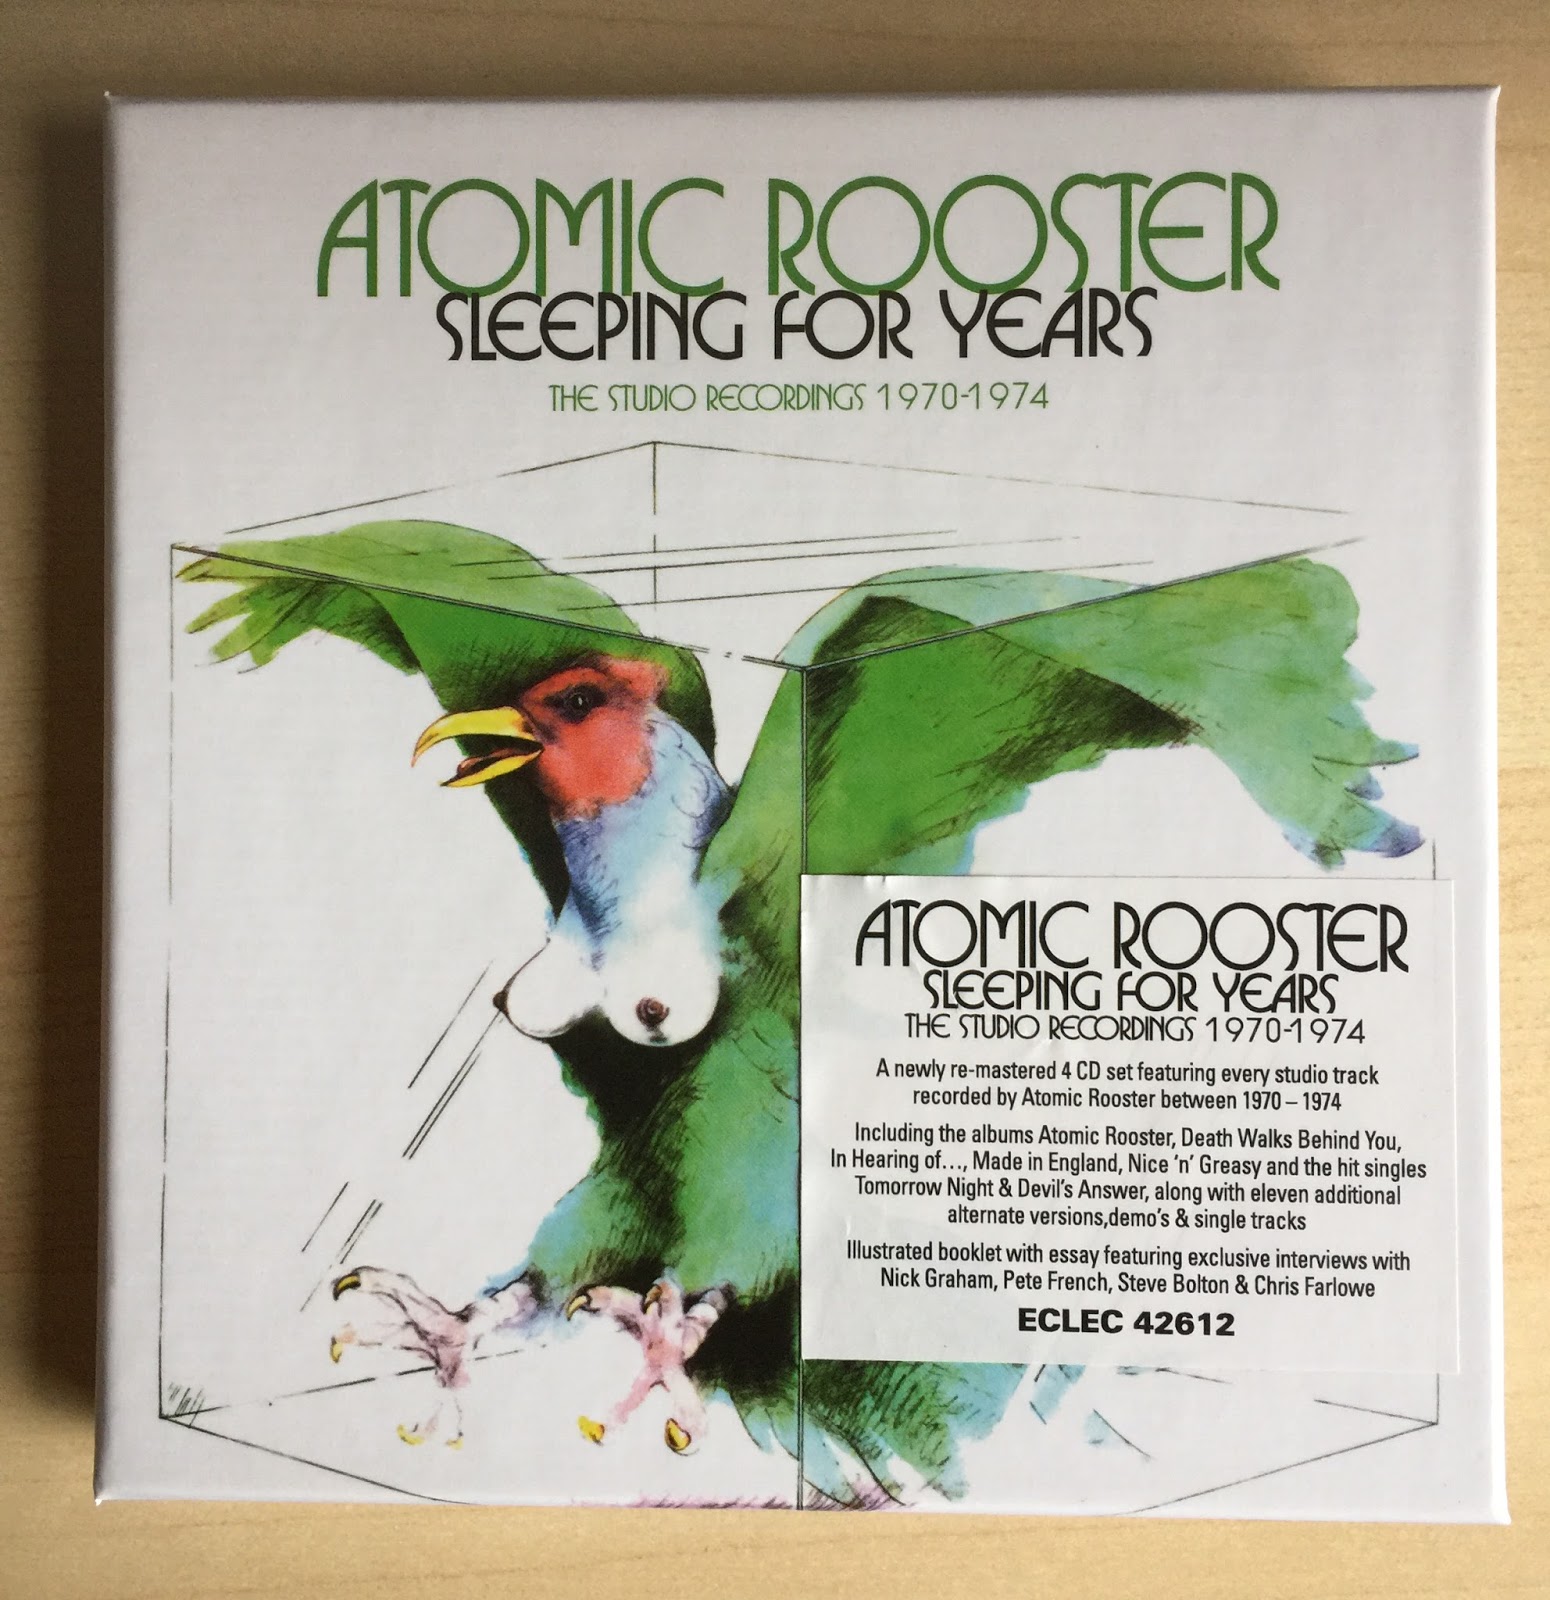 Sounds Good, Looks Good: Sleeping For Years: The Studio Recordings  1970-1974 by ATOMIC ROOSTER (December 2017 Esoteric Recordings 4CD Box Set  - Ben Wiseman Remasters) - A Review by Mark Barry